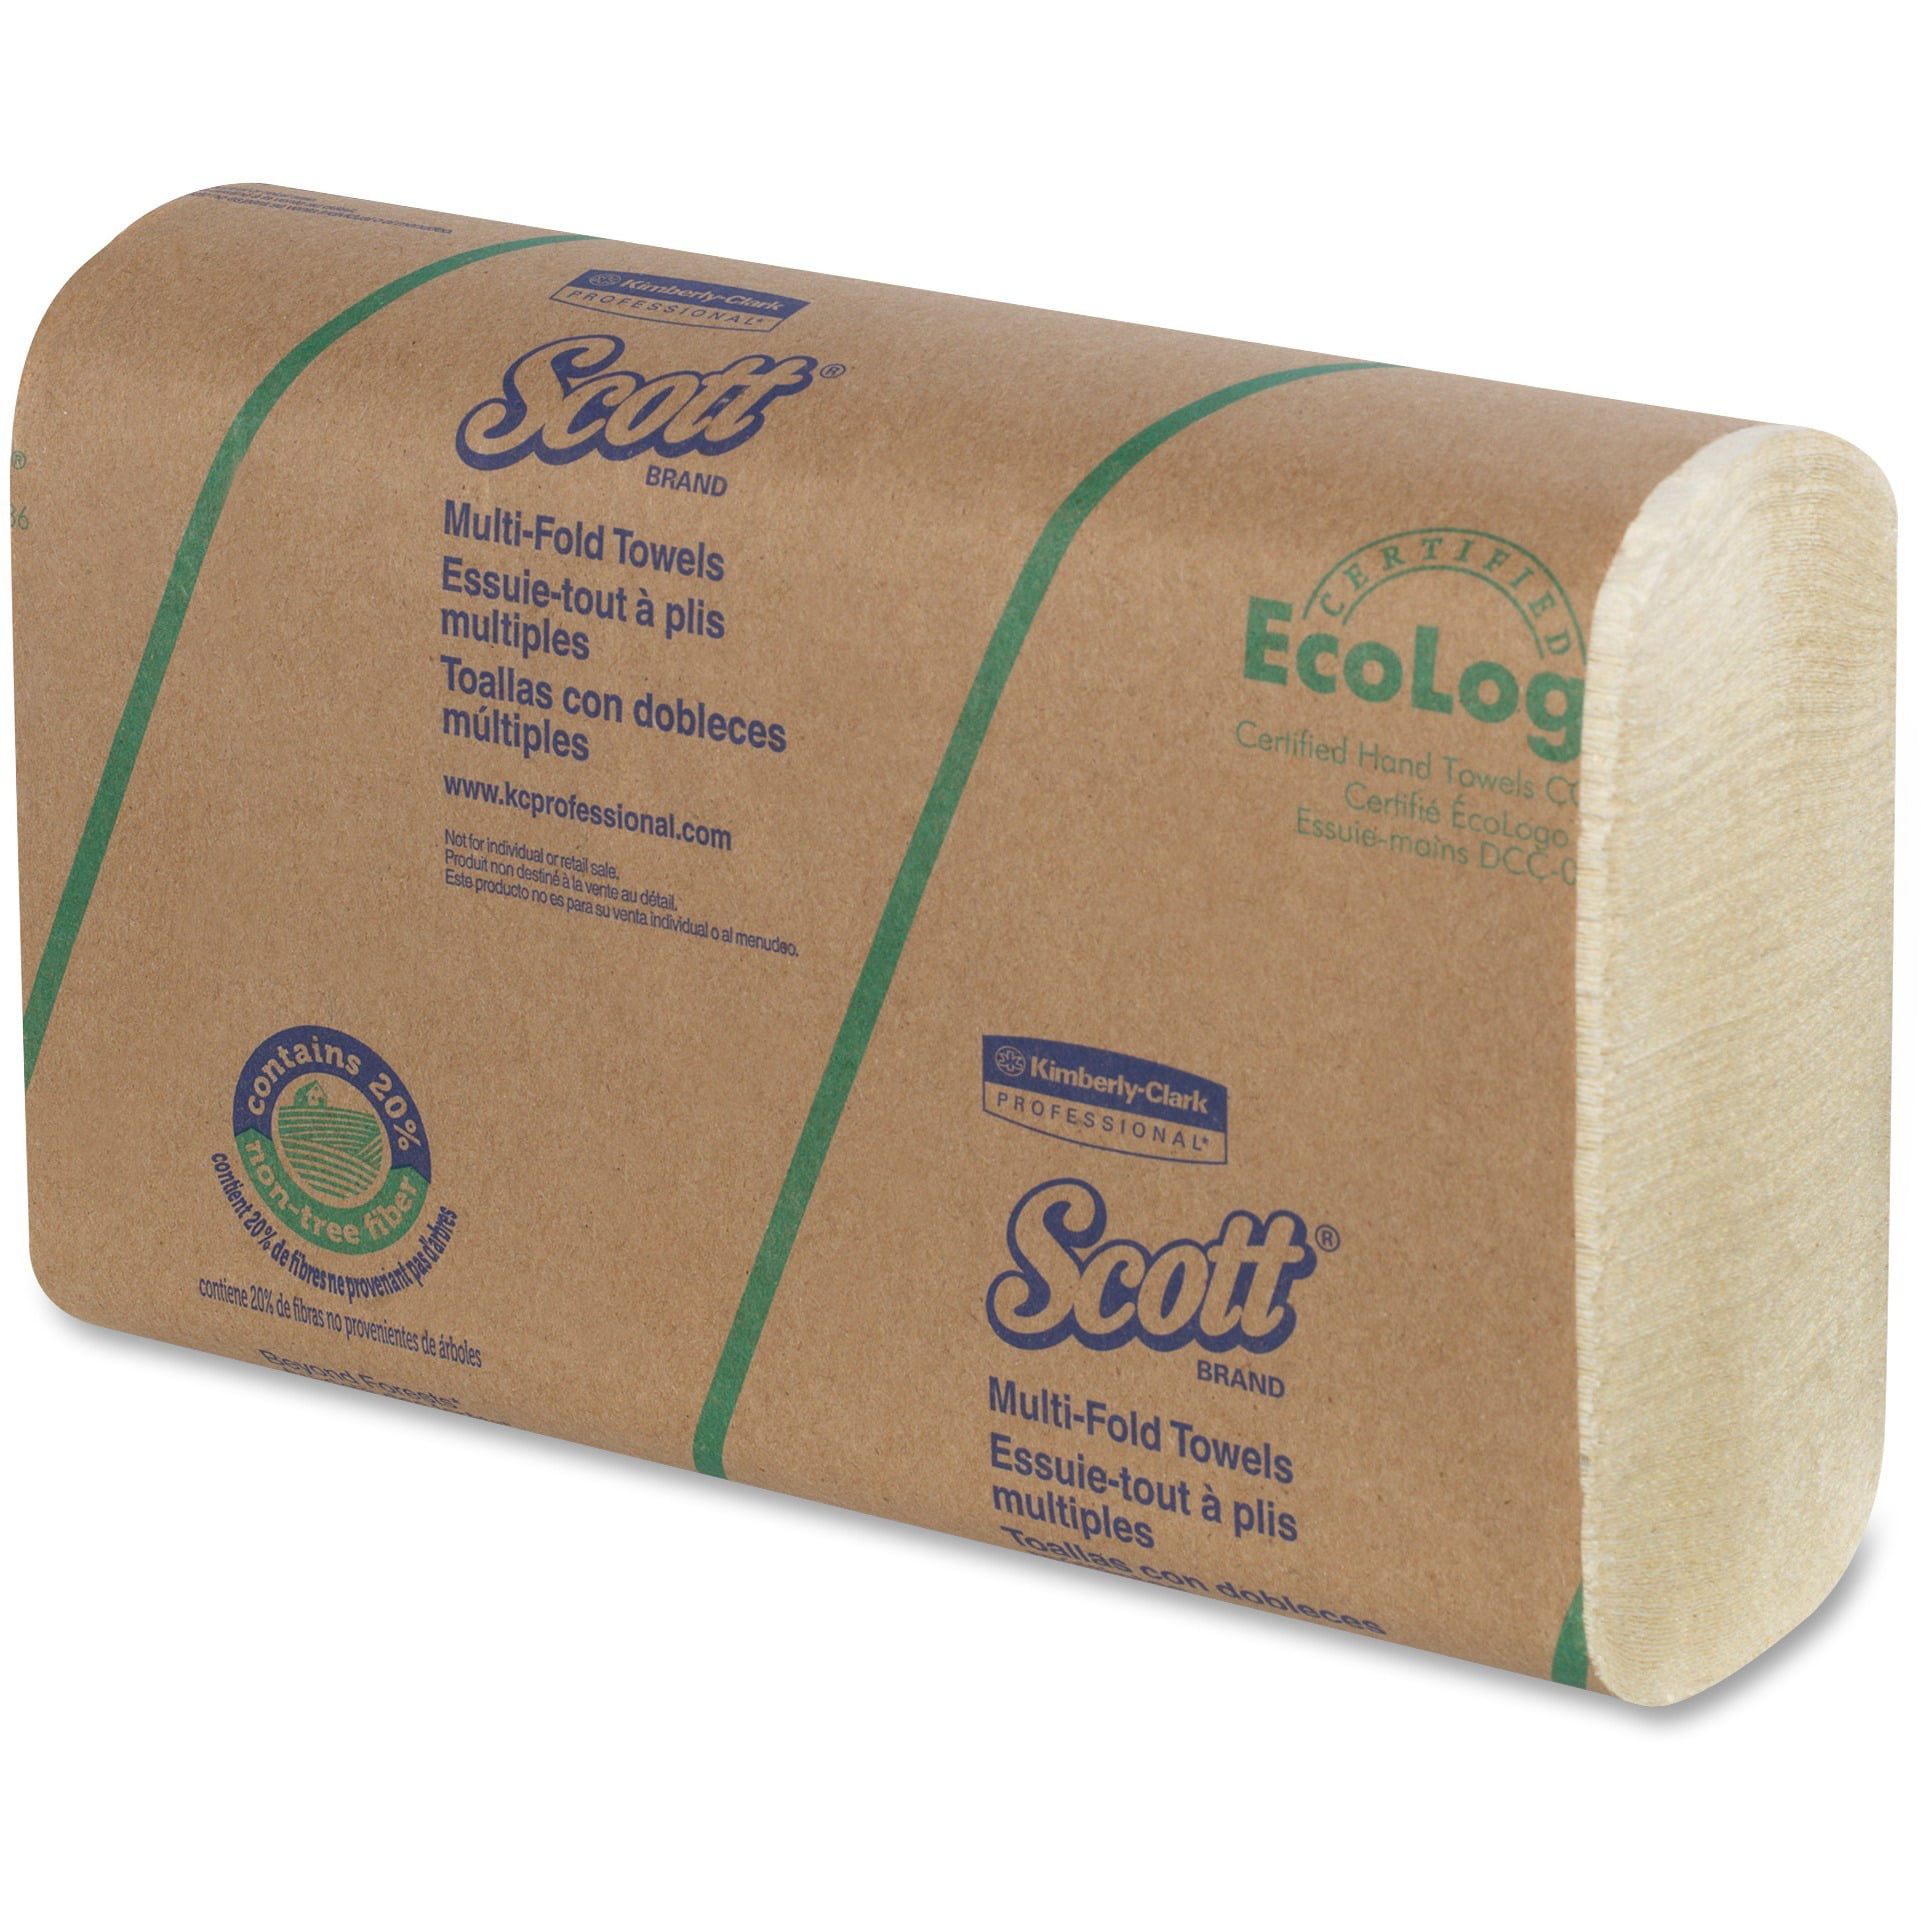 Details about   2000 Multi-Fold Paper Towels White 8 Packs of 250 Towels 9.06" x 9.45" 